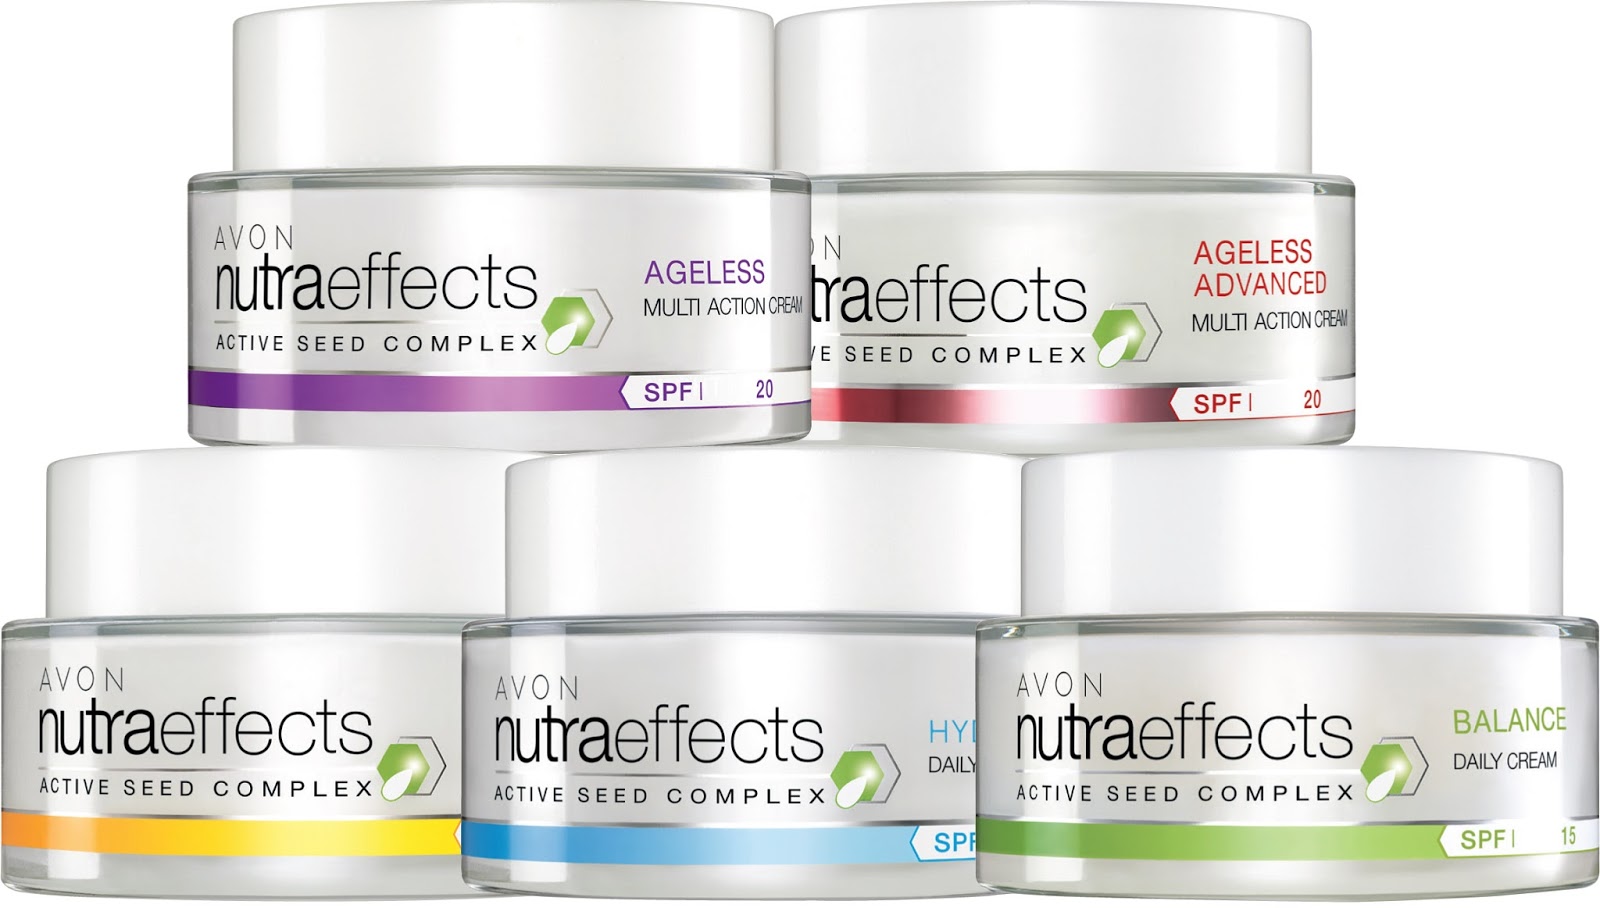 Nutra lift facial products